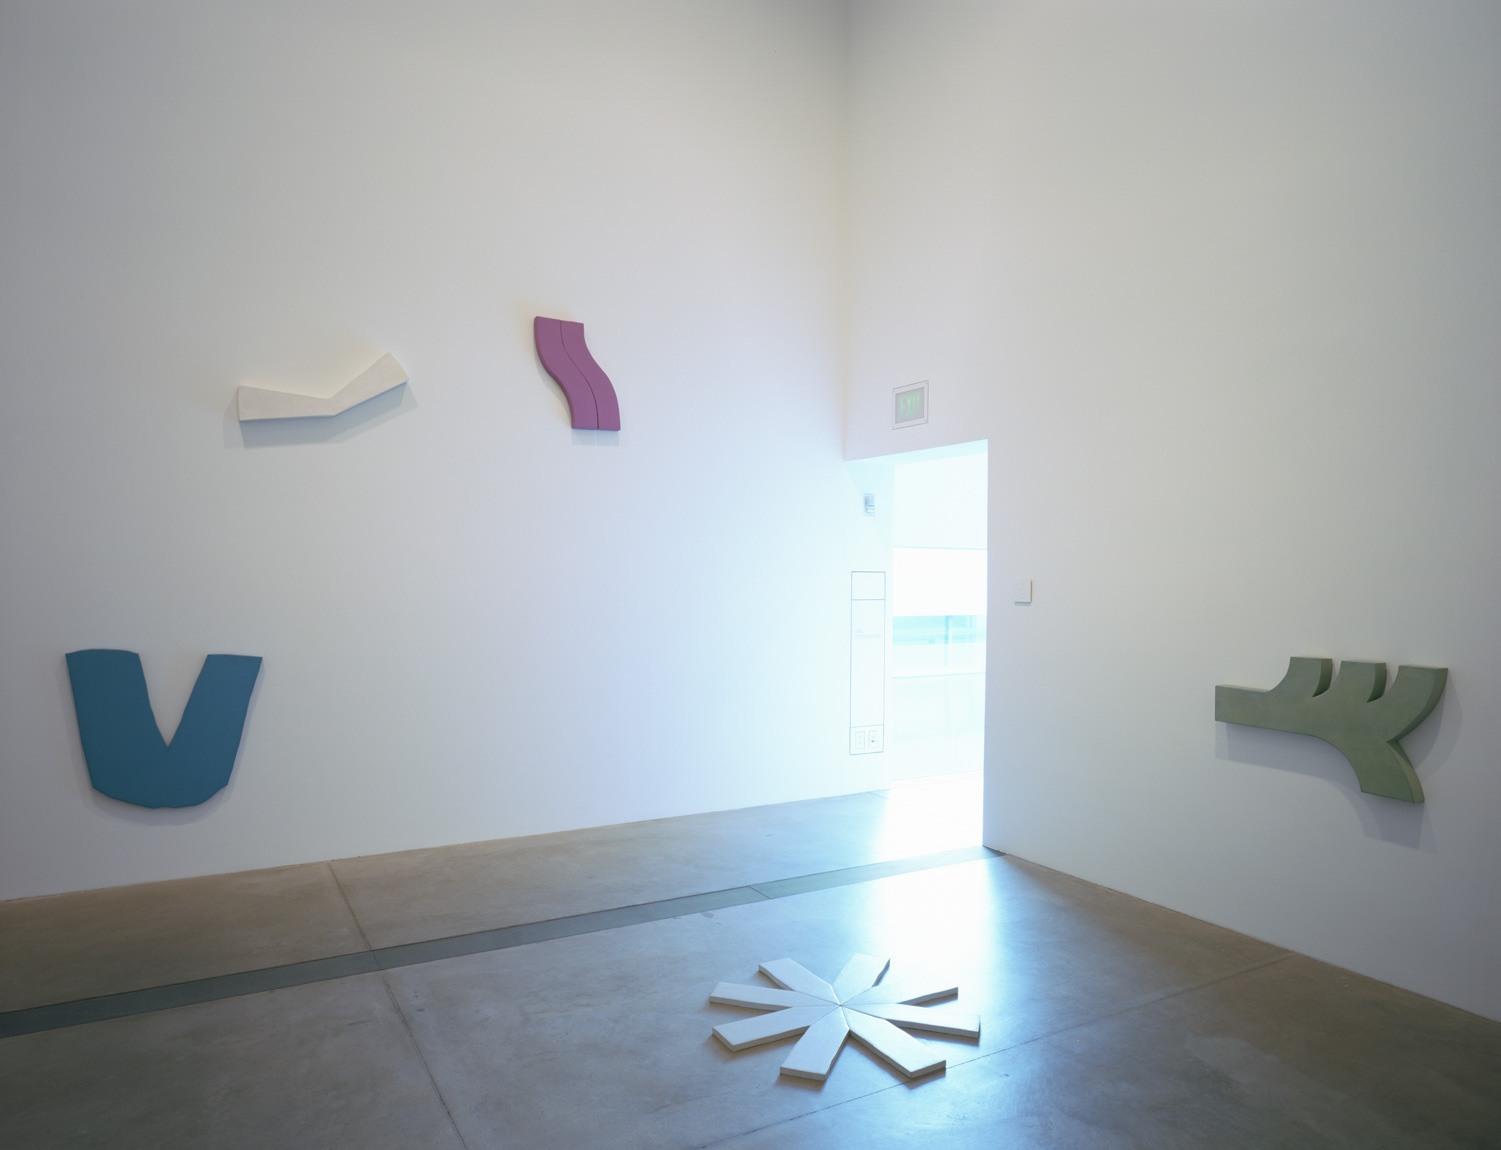 Colorful, flat, wooden sculptures of varying shapes by Richard Tuttle are installed on the walls and floor of the Cube Gallery.